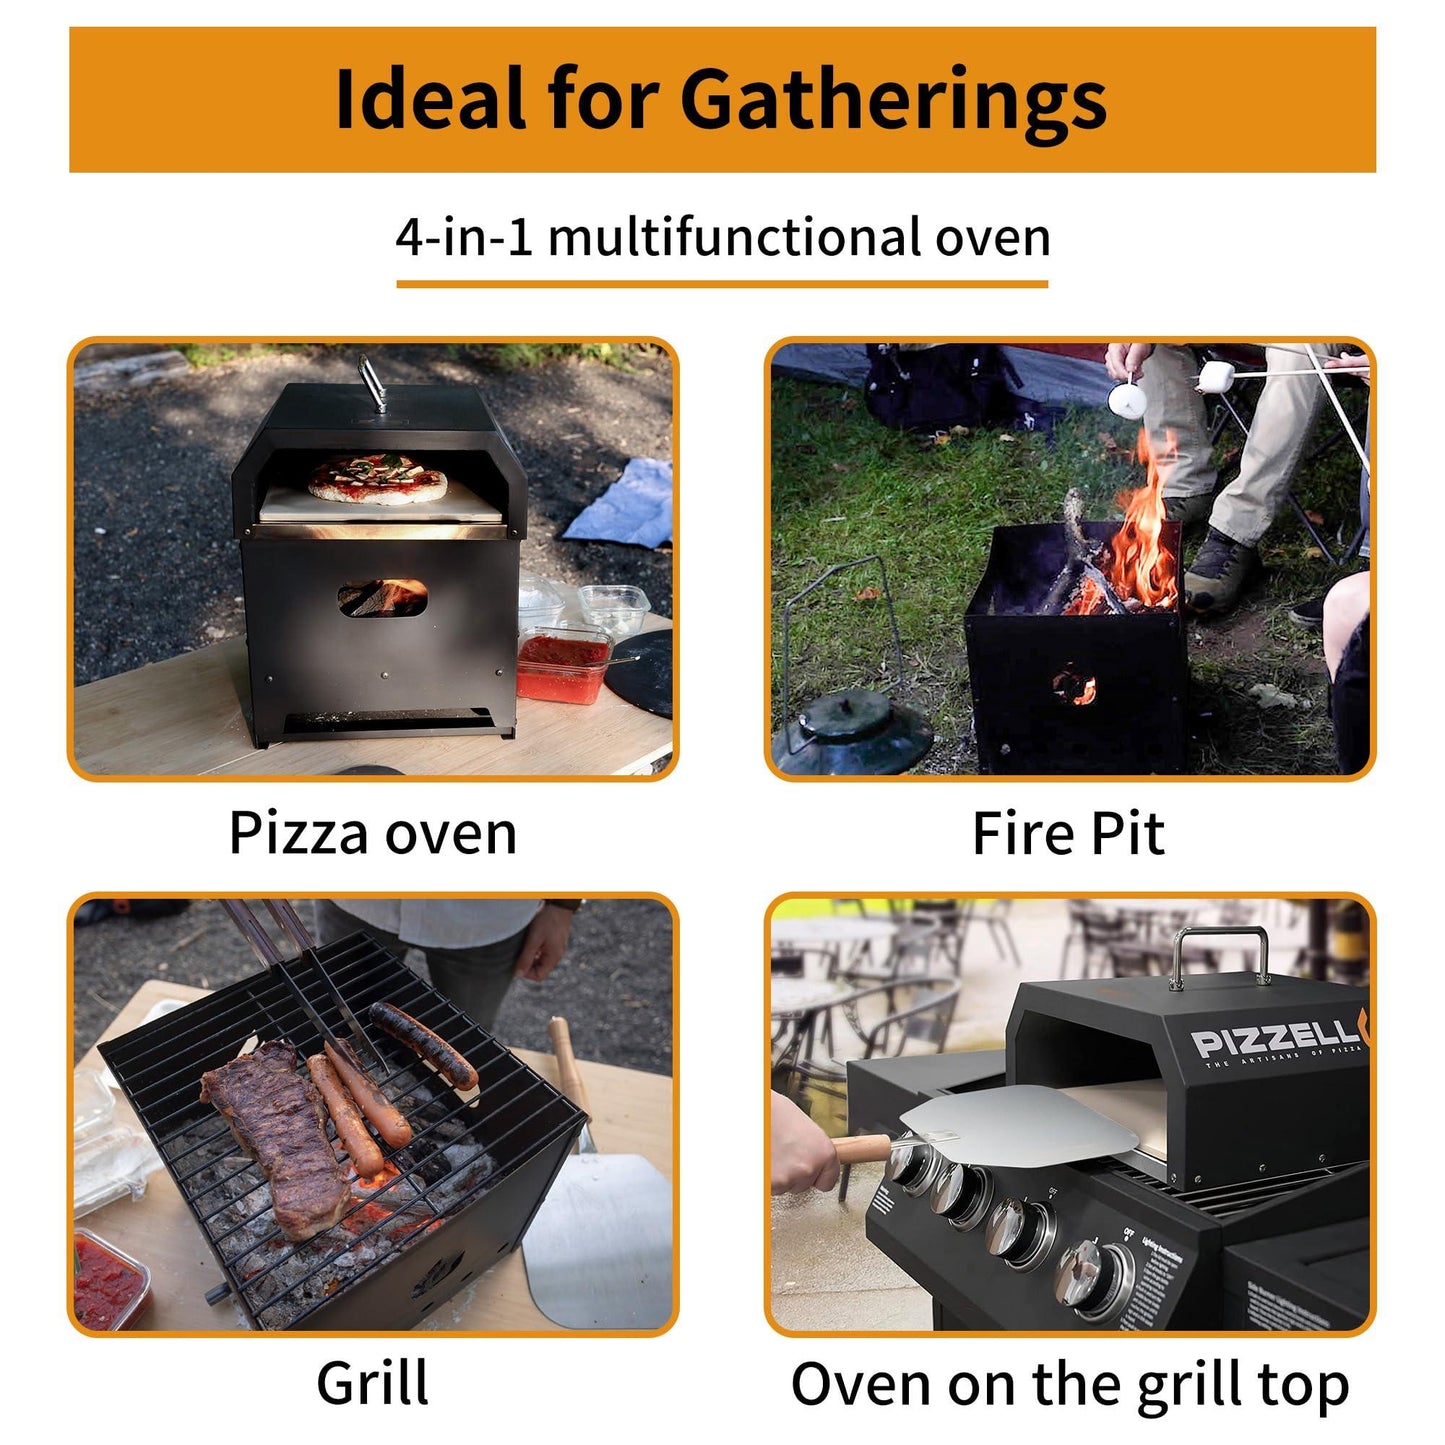 PIZZELLO Outdoor Pizza Oven 4 in 1 Wood Fired 2-Layer Detachable Outside Ovens With Pizza Stone, Pizza Peel, Cover, Cooking Grill Grate, Pizzello Gusto - CookCave